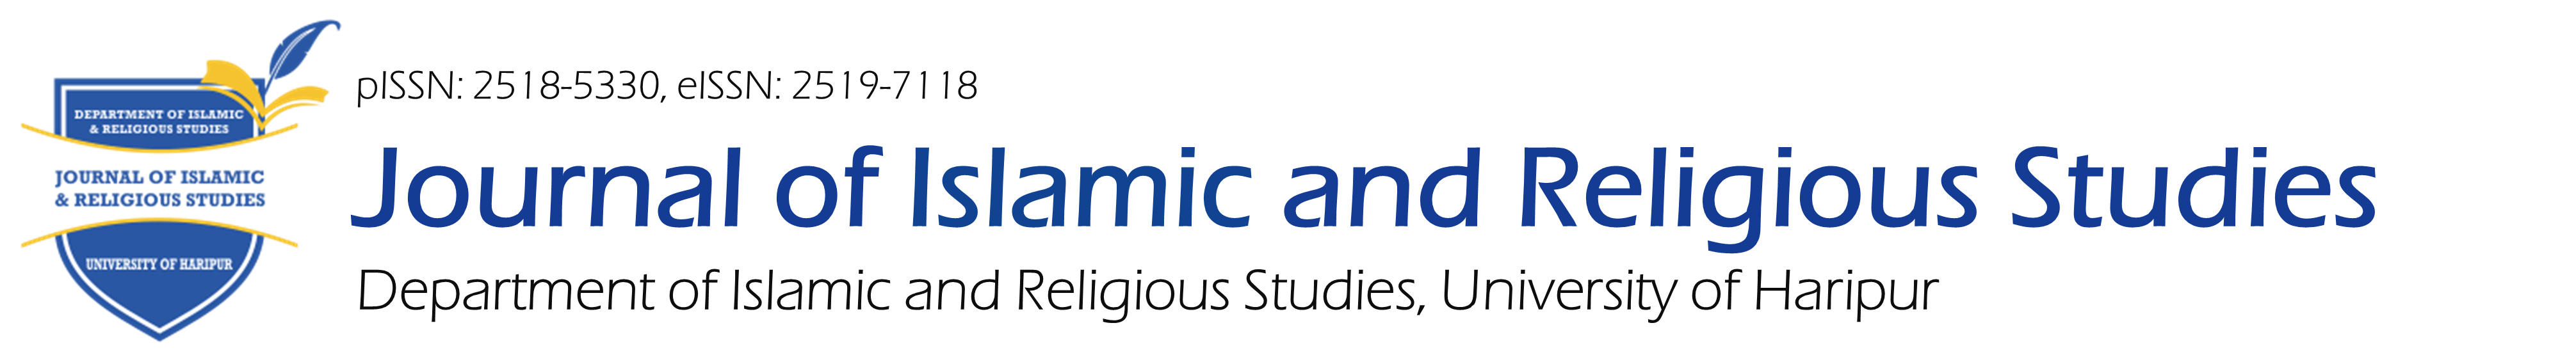 Journals Journal of Islamic and Religious Studies